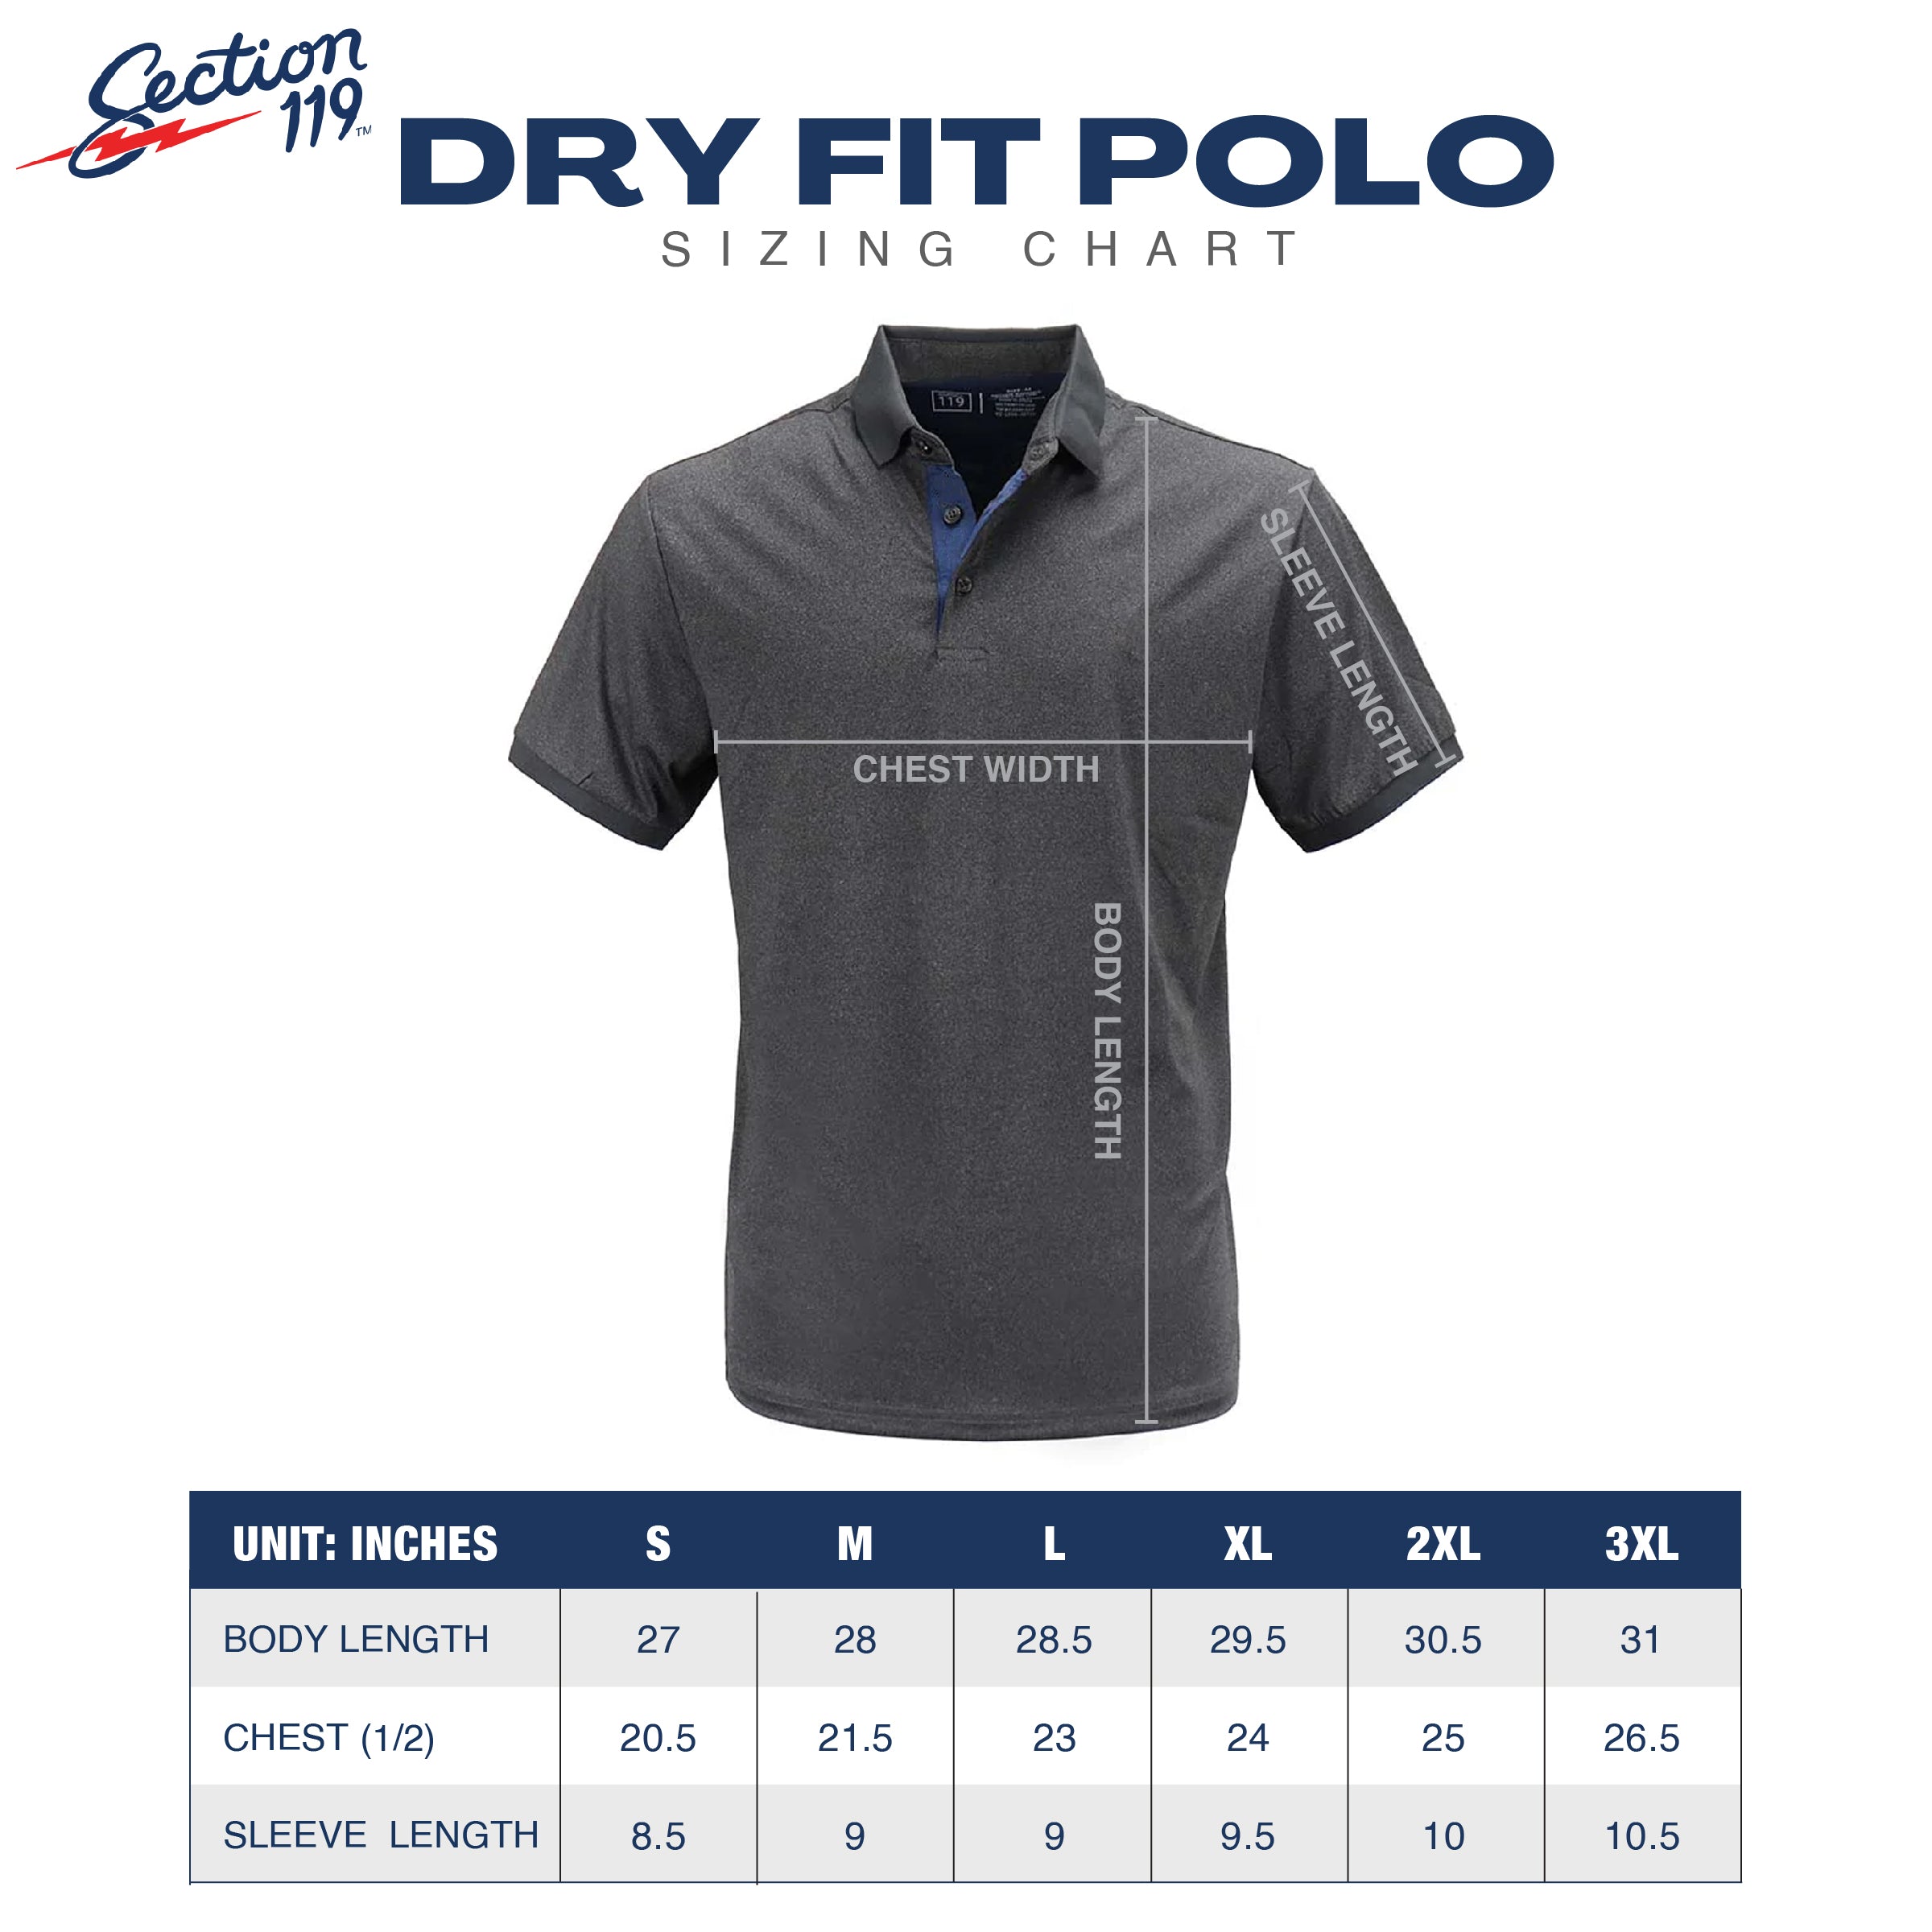 GD Dry Fit Polo Space Your Face in Black and Red Stripes - Section 119